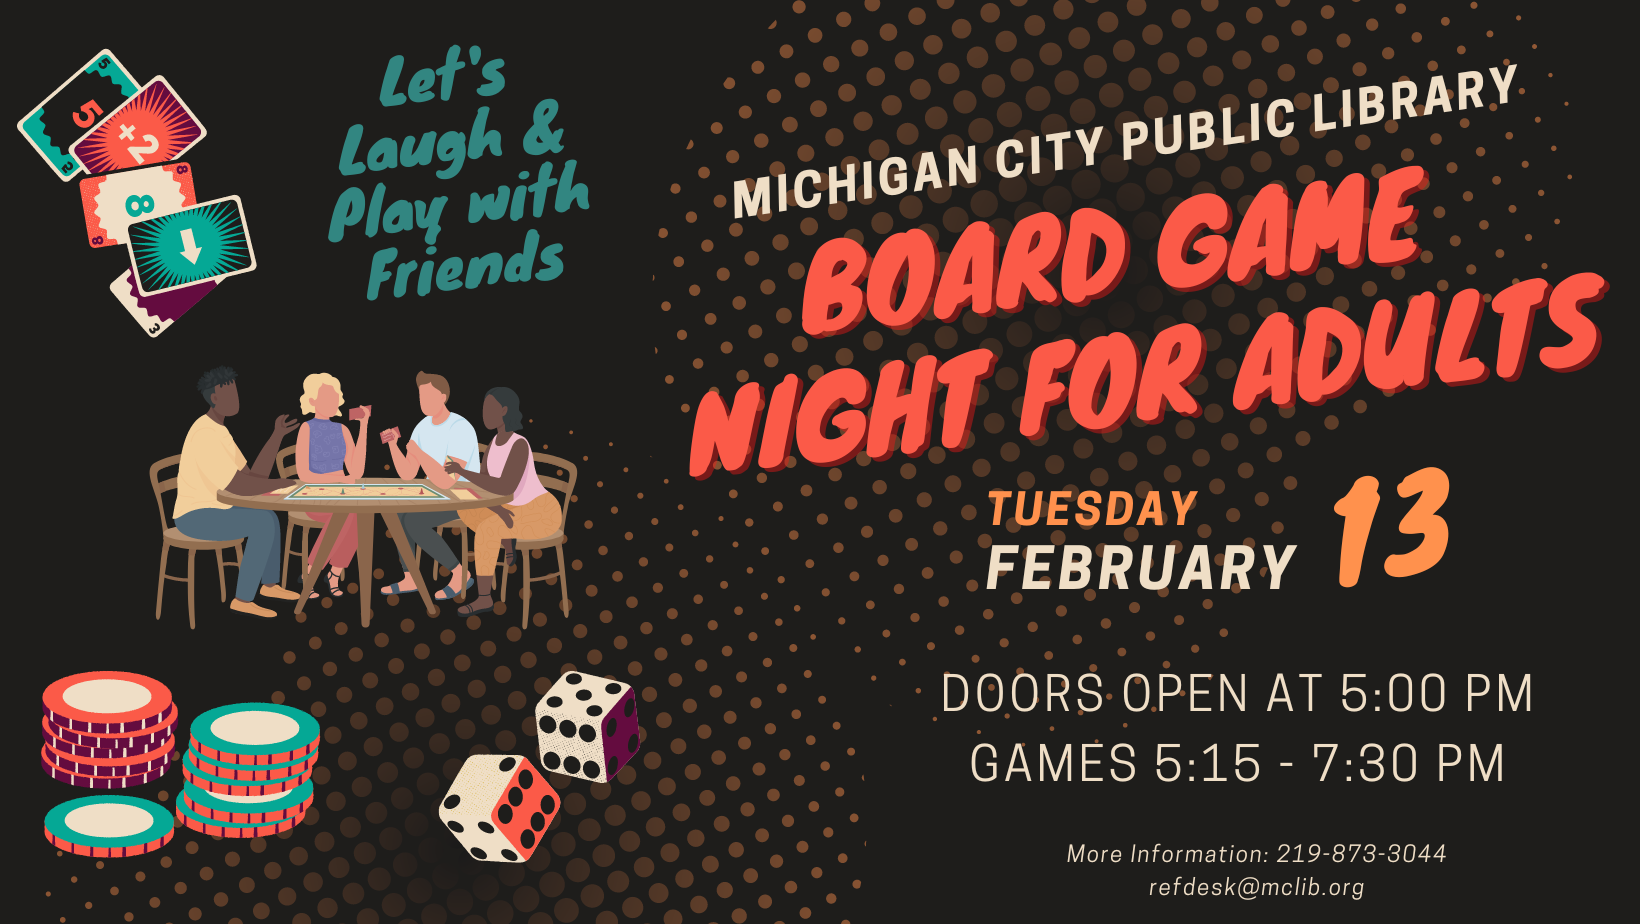 Board Game Night for Adults, Tuesday, February 13 at 5:00 pm